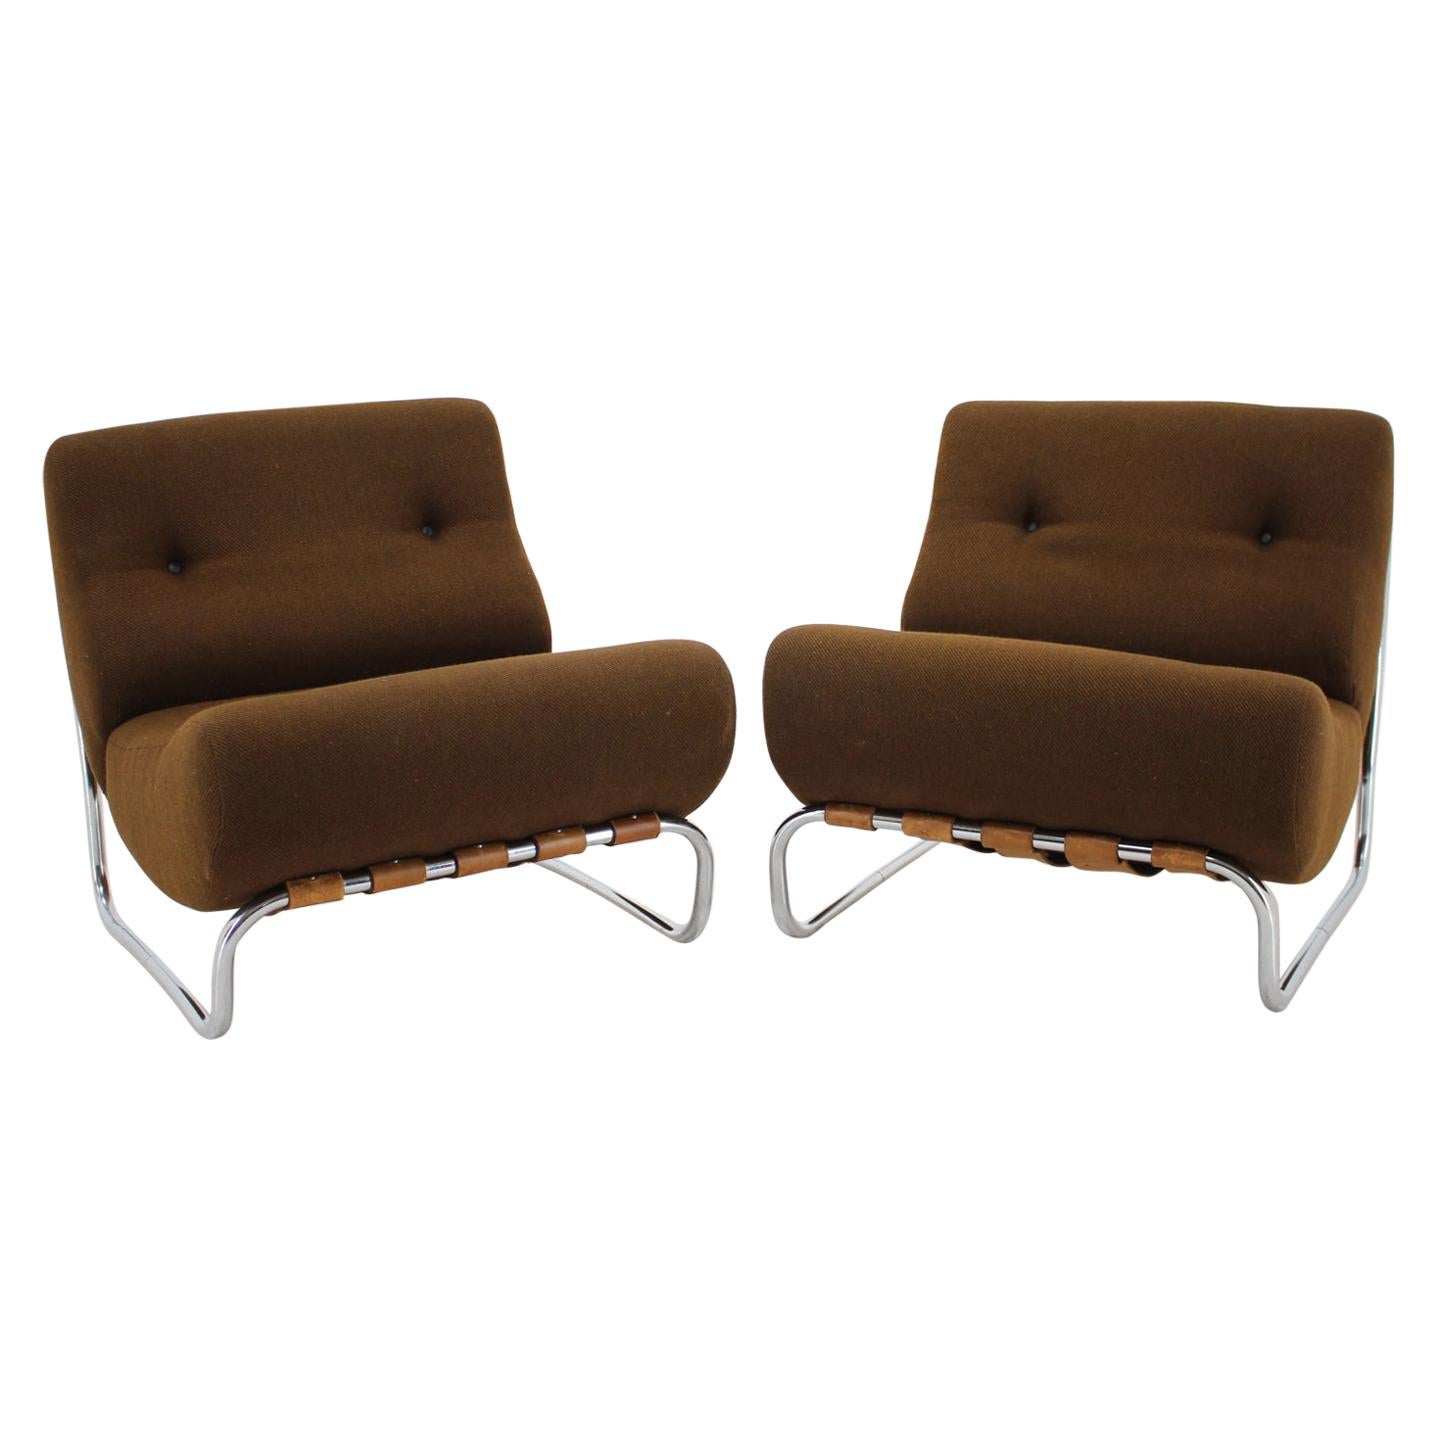 Pair of German Lounge Chairs, 1970